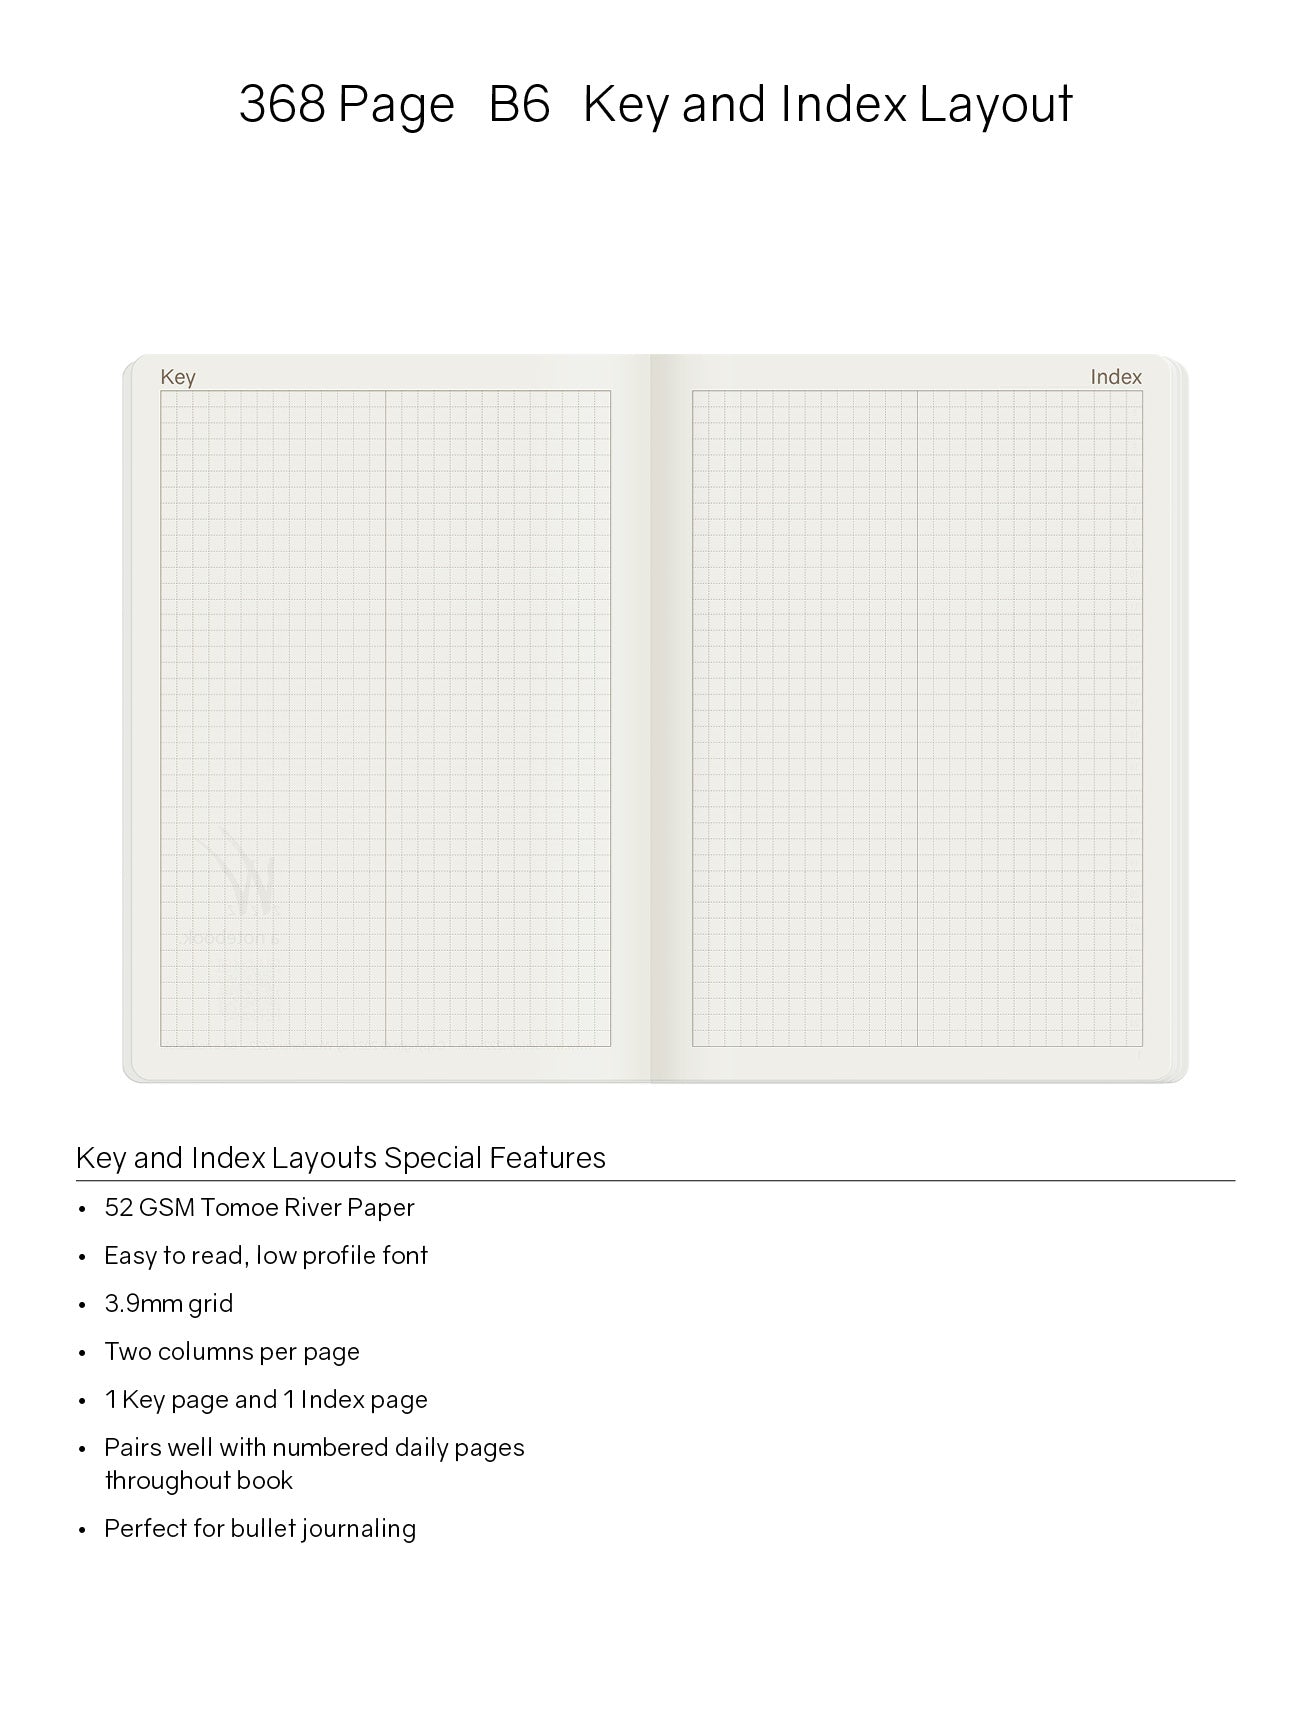 B6 Notebook (368 pages)